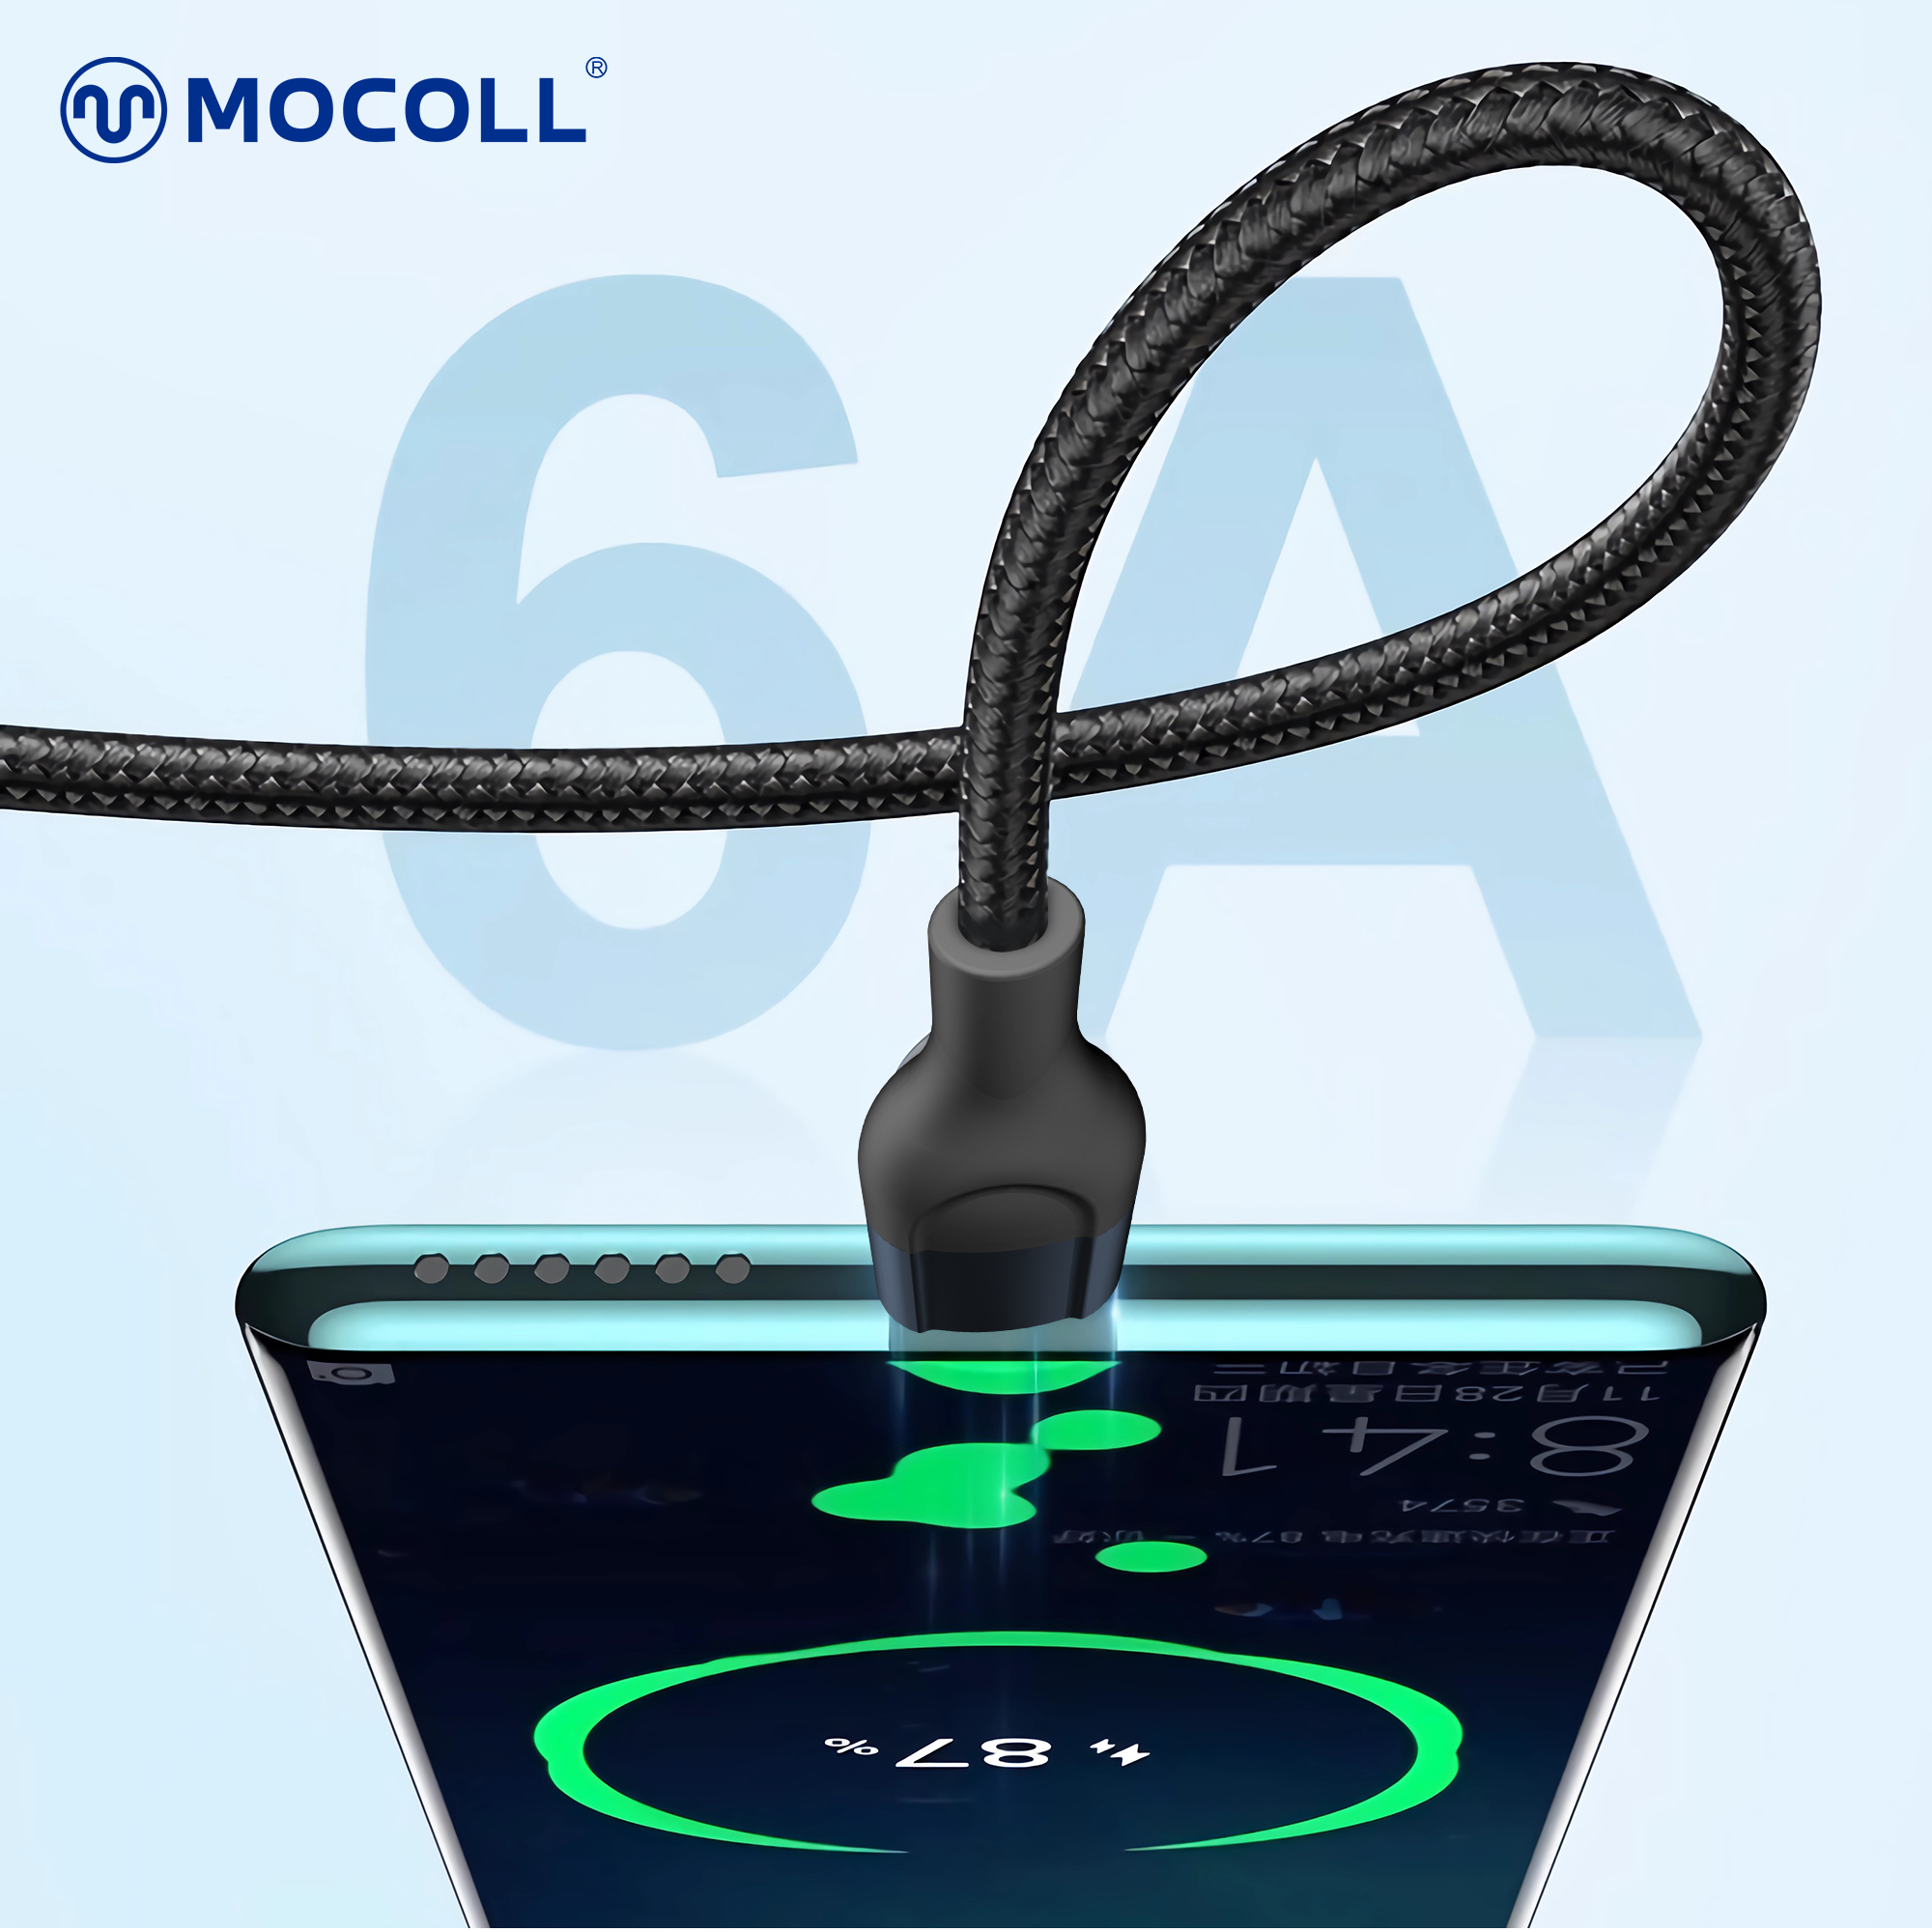 Alfa Series Thunder 3 in 1 Fast Charging Cable